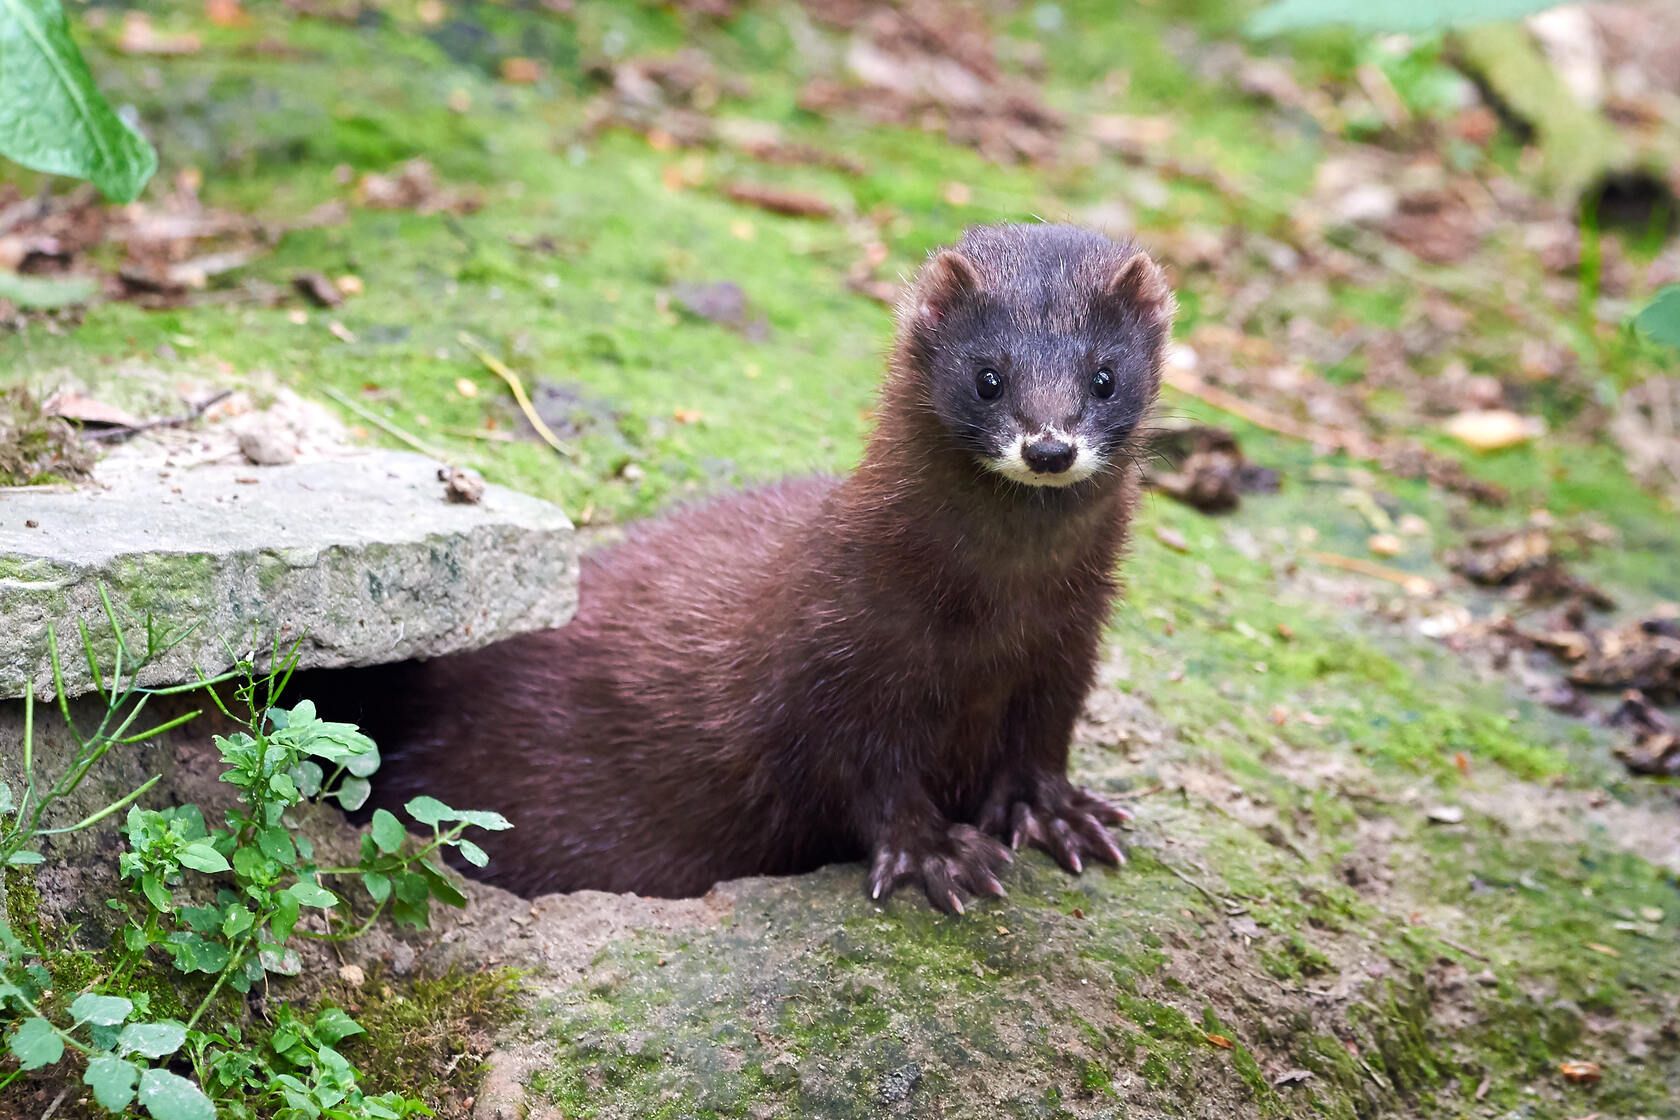 What Do Minks Eat? What Food Do We 'Mink' Is Their Favorite? | Kidadl